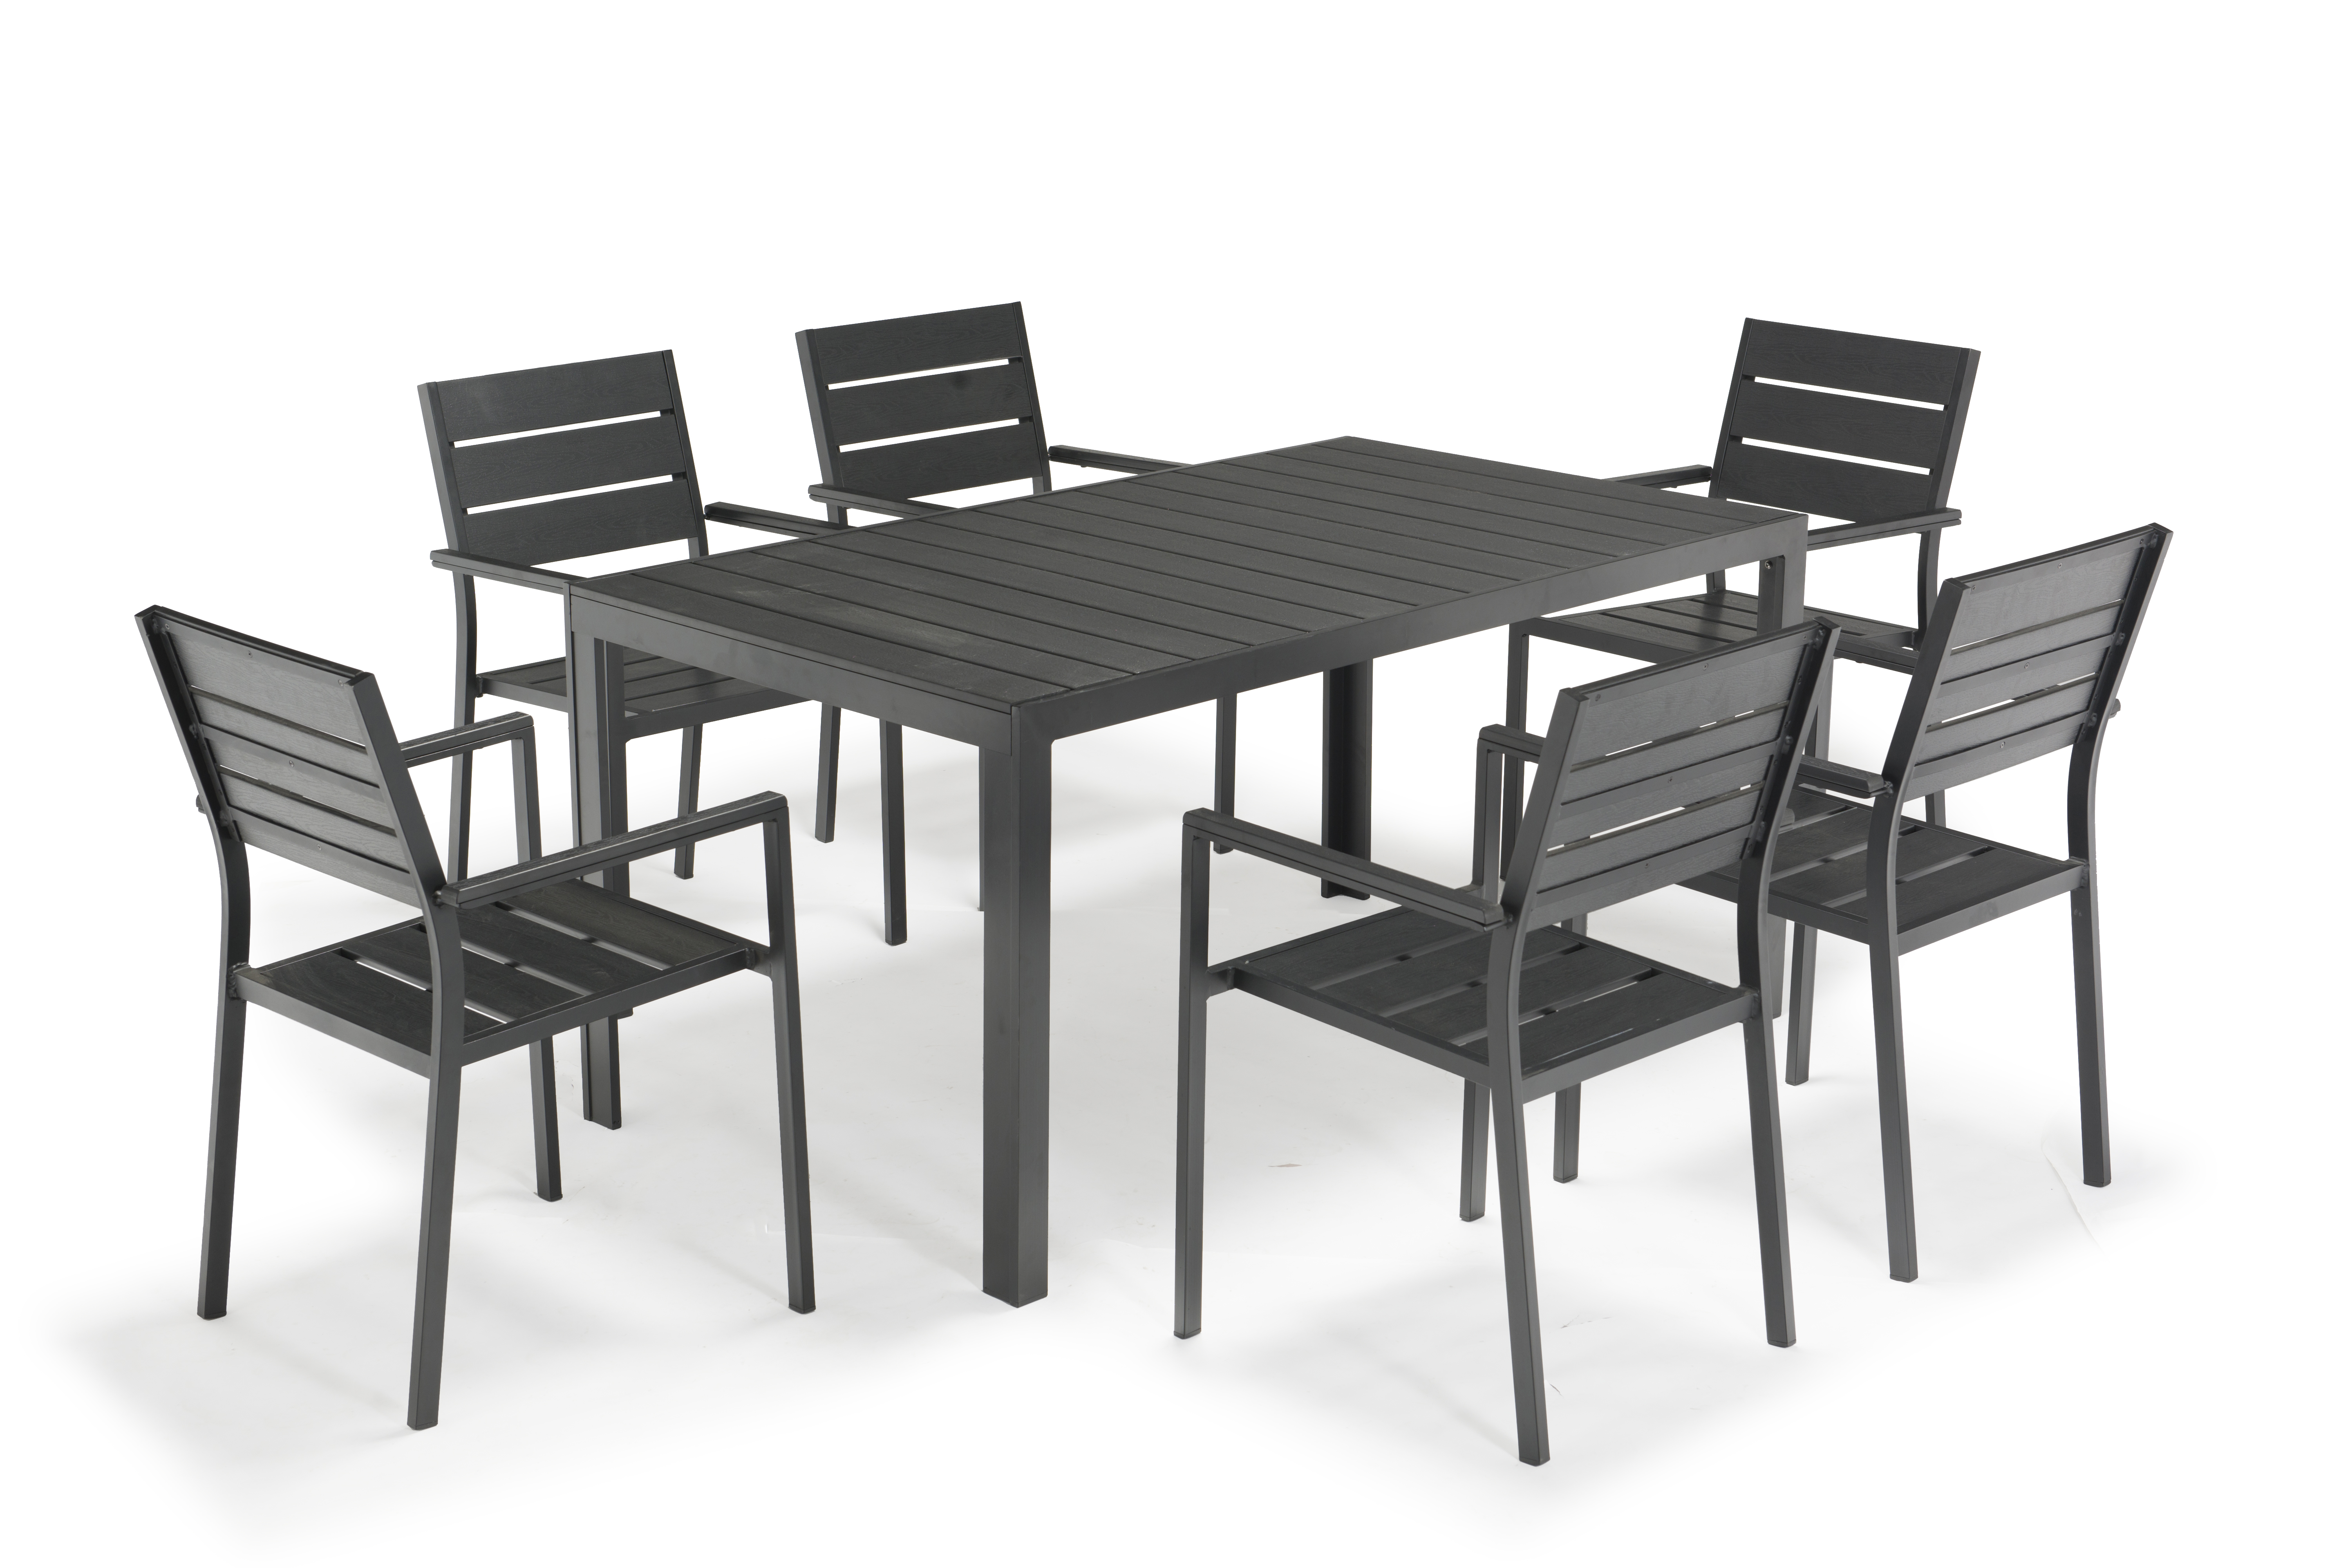 Advantages of outdoor plastic wood tables and chairs